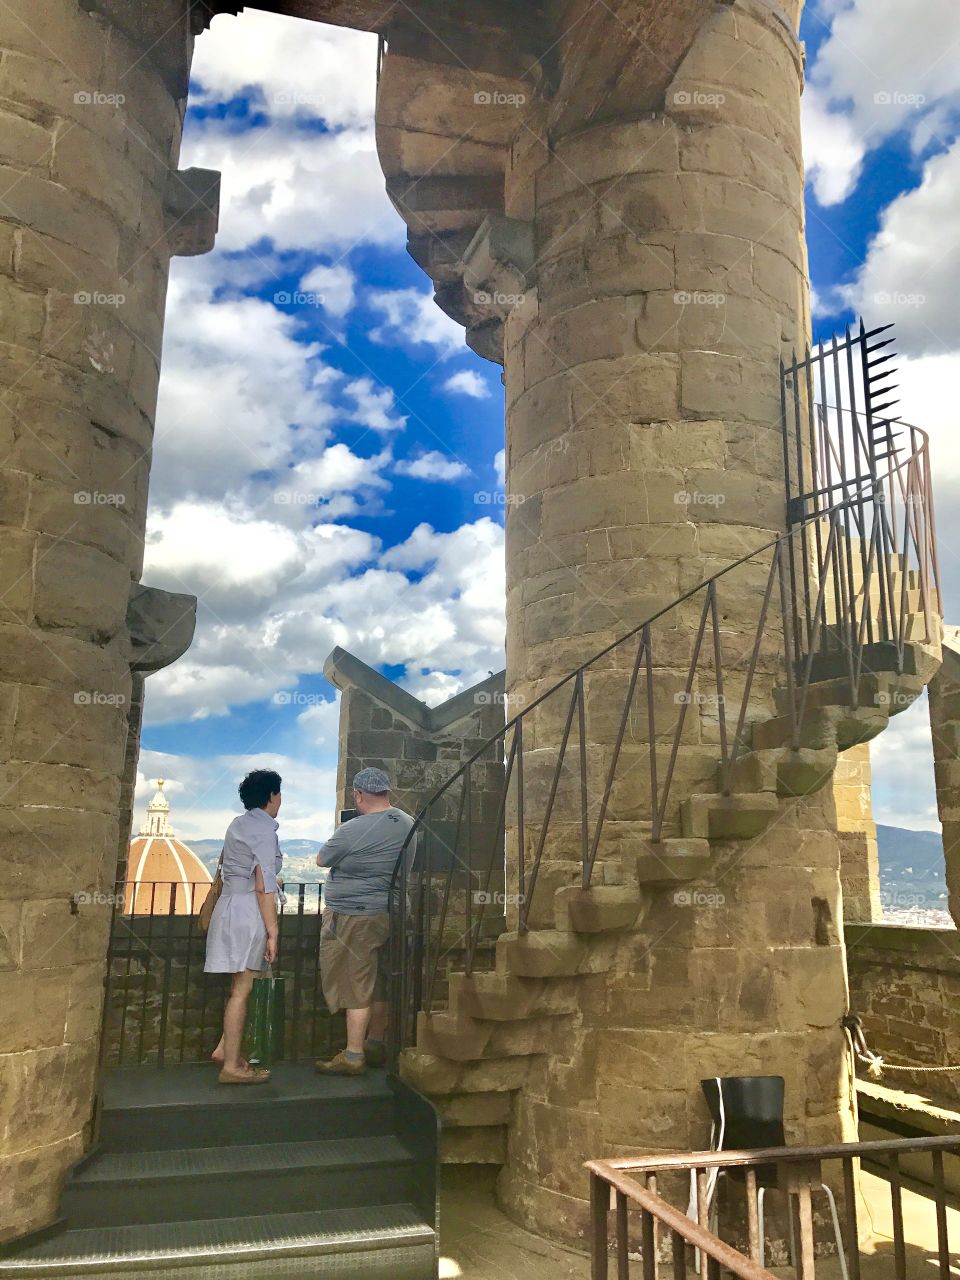 At the top of Palazzo Vecchio, 2 tourists stop to see the view!